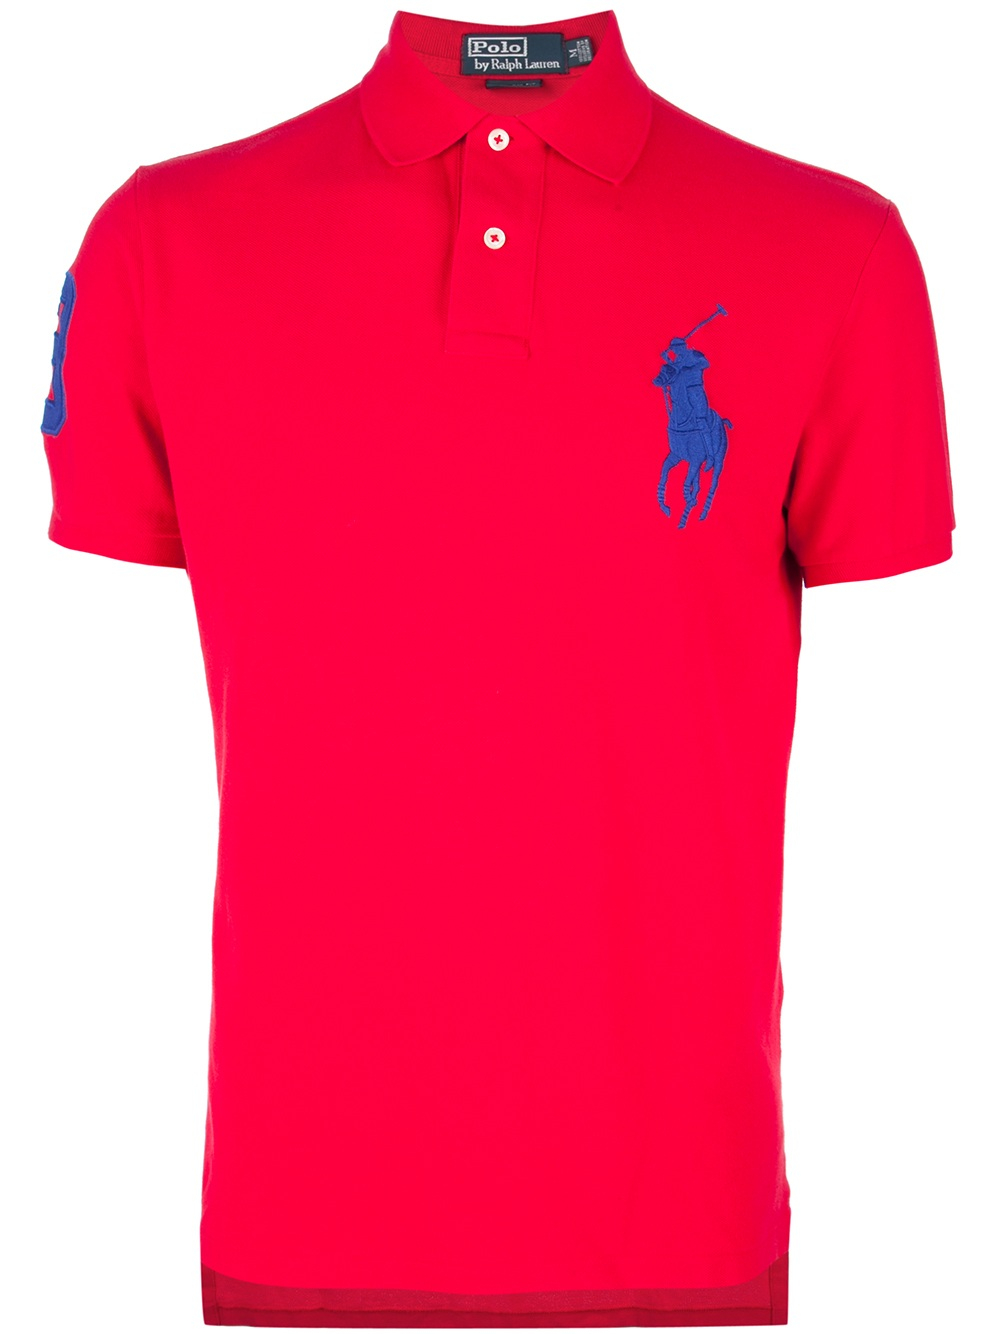 Polo Ralph Lauren Polo Shirt in Red for Men - Lyst